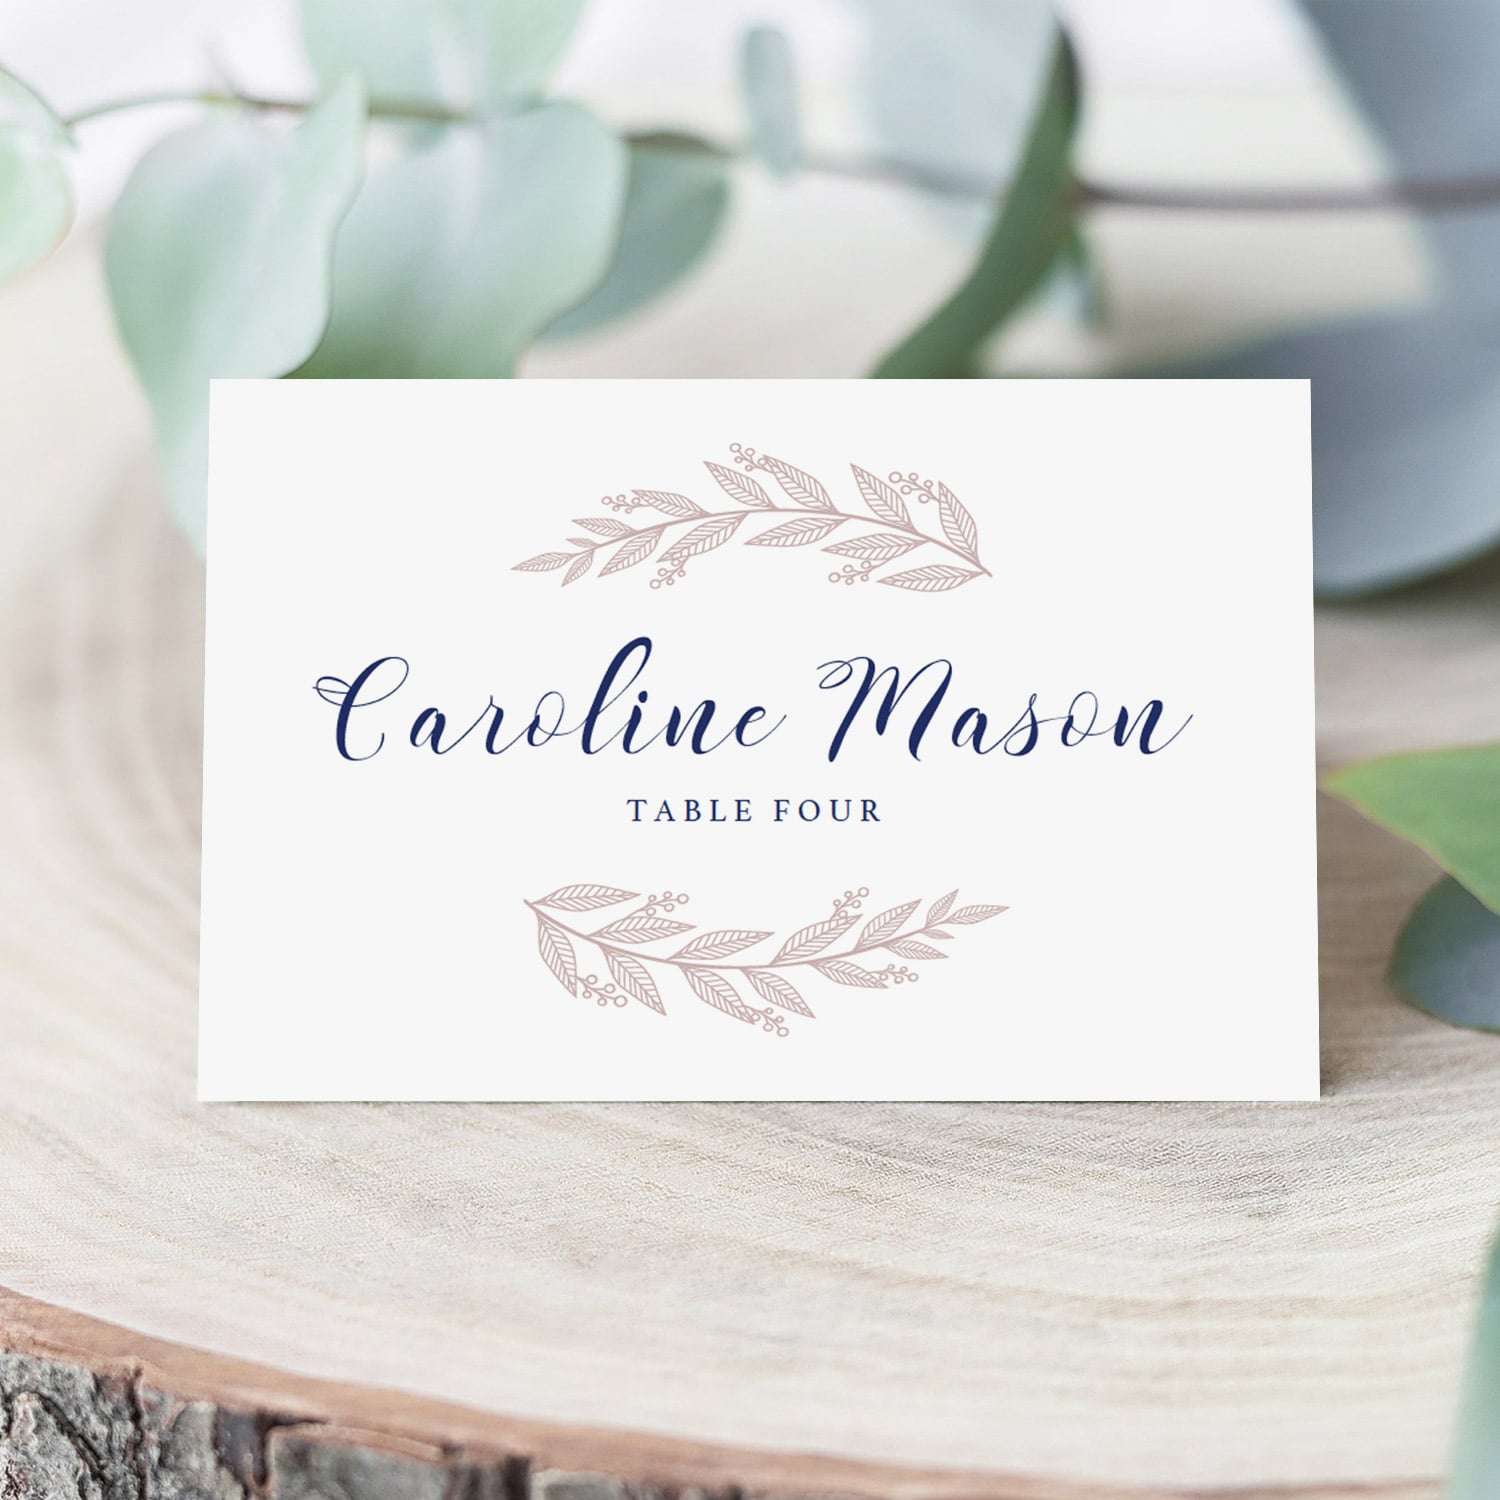 Folded place cards download by LittleSizzle